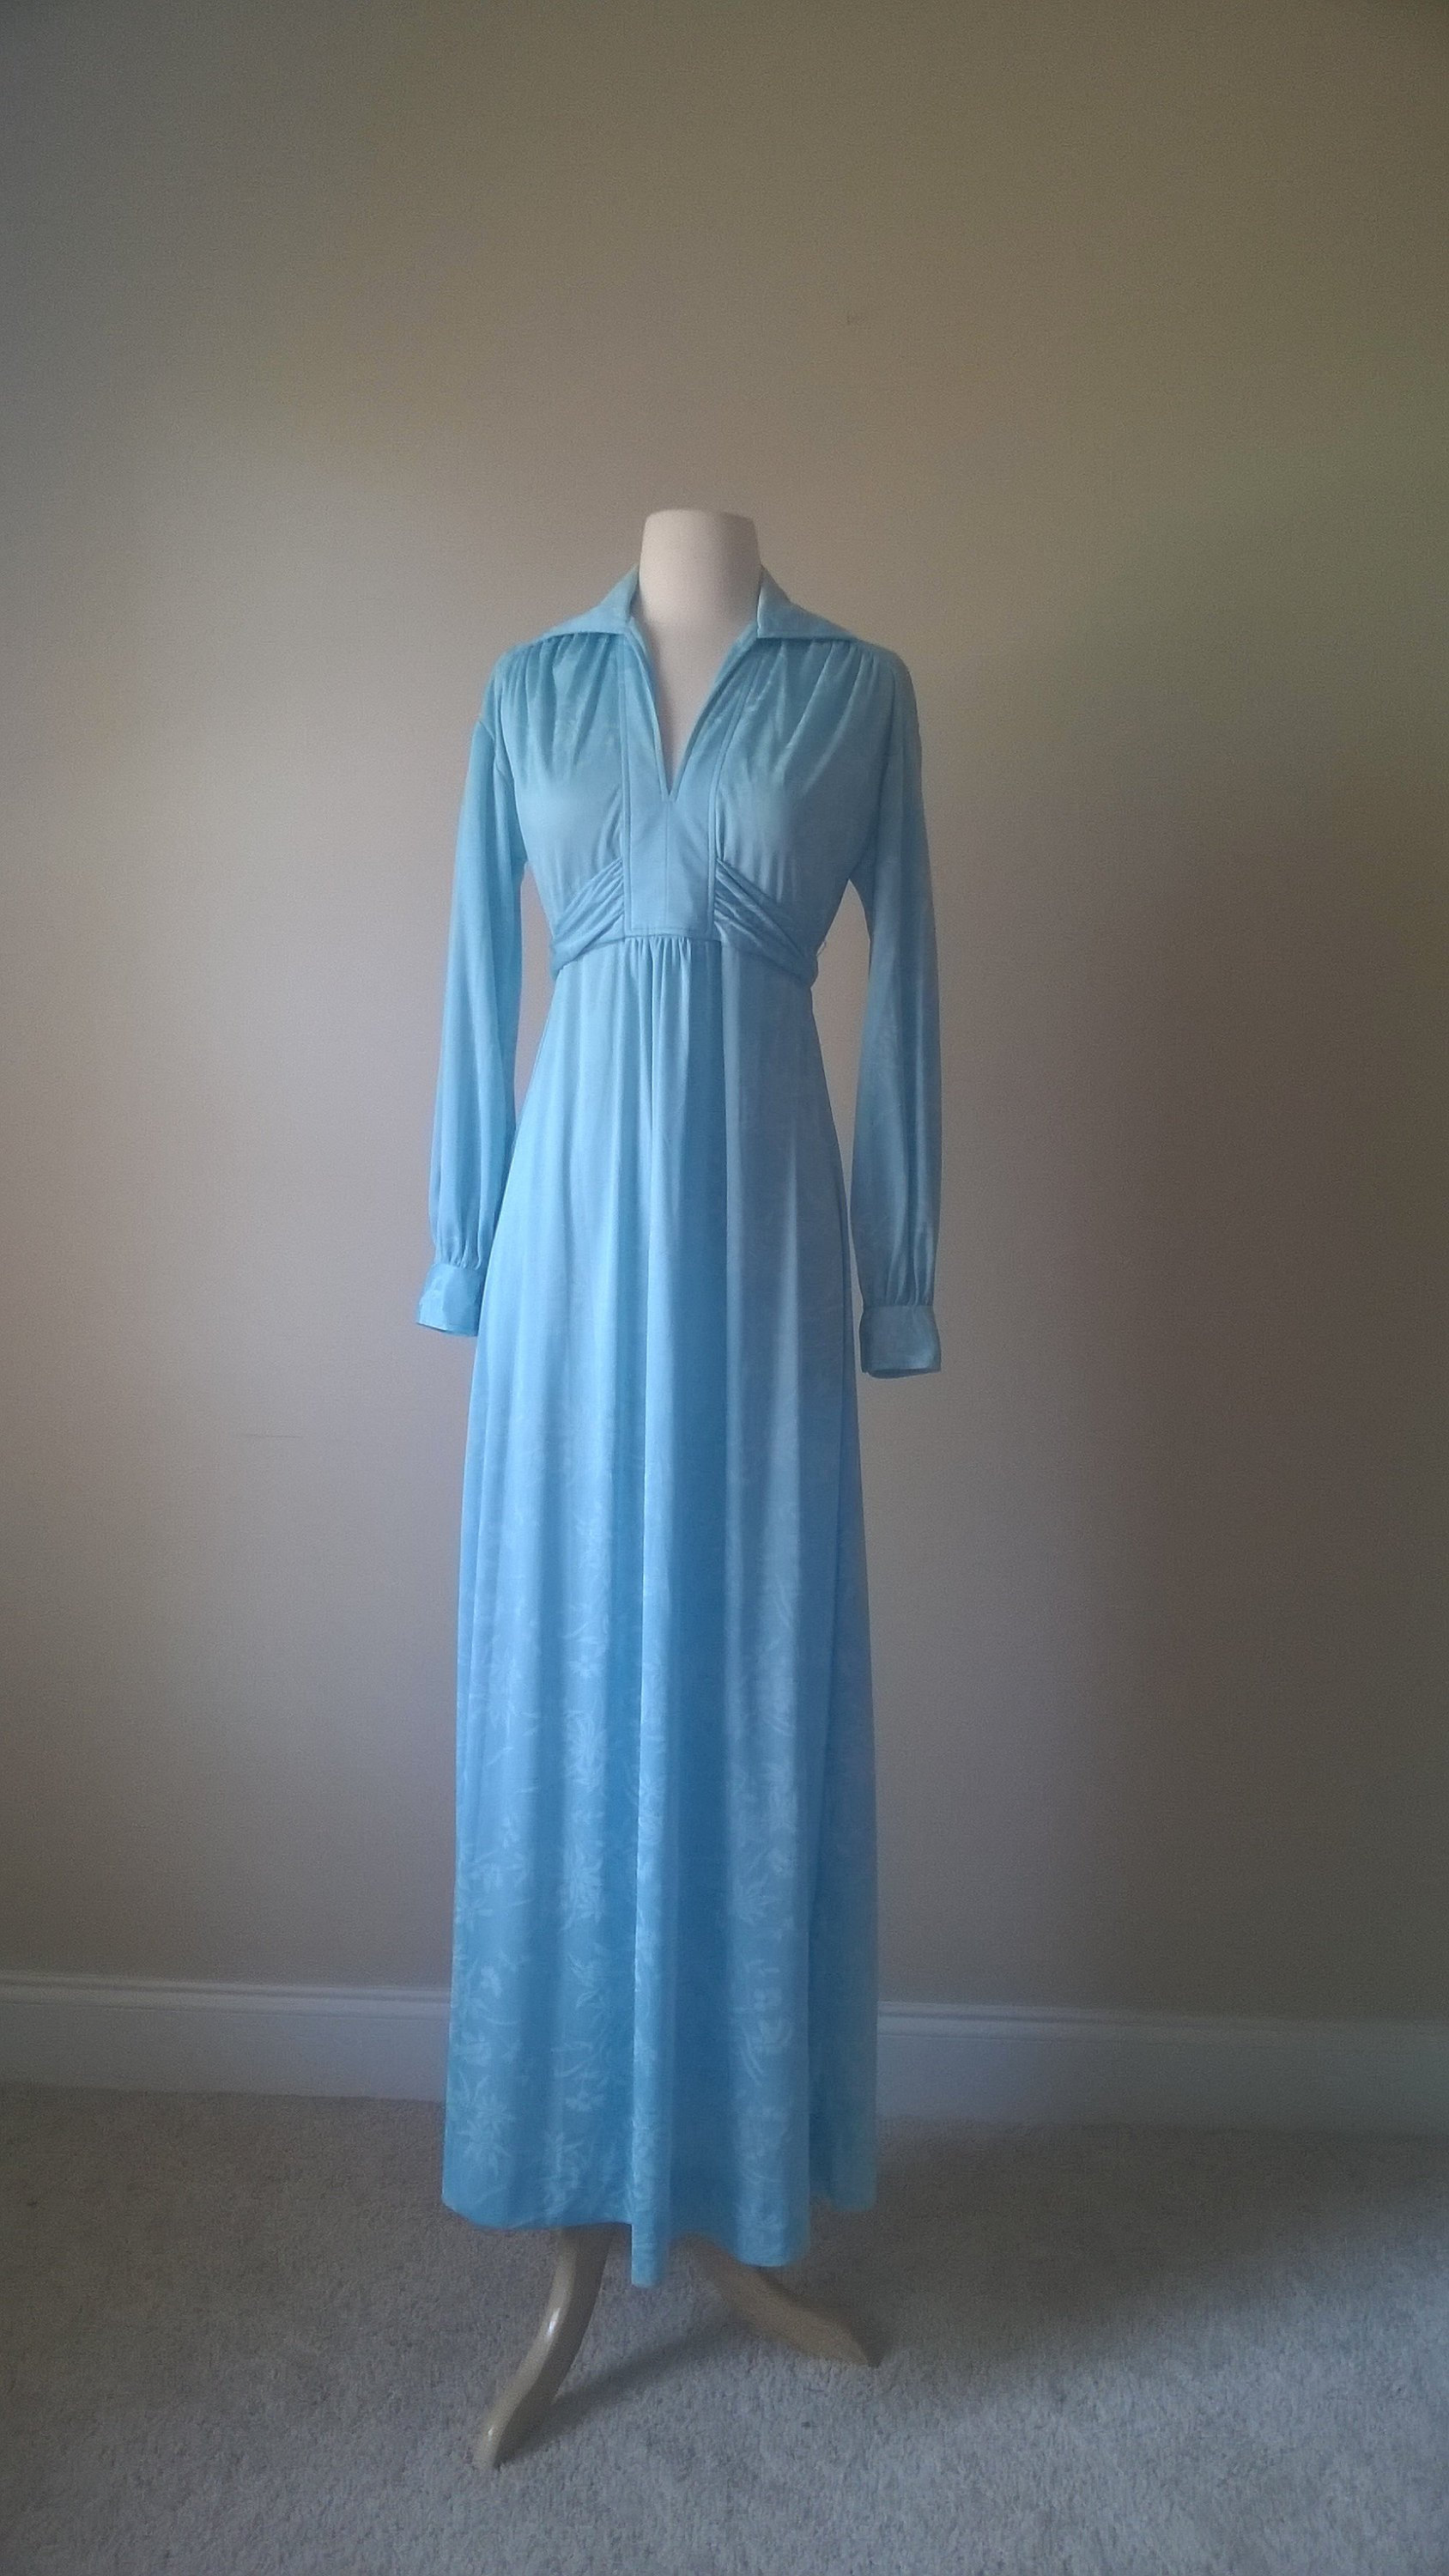 Baby Blue 70's Maxi Gown // Glam Formal Hostess Wedding | Etsy